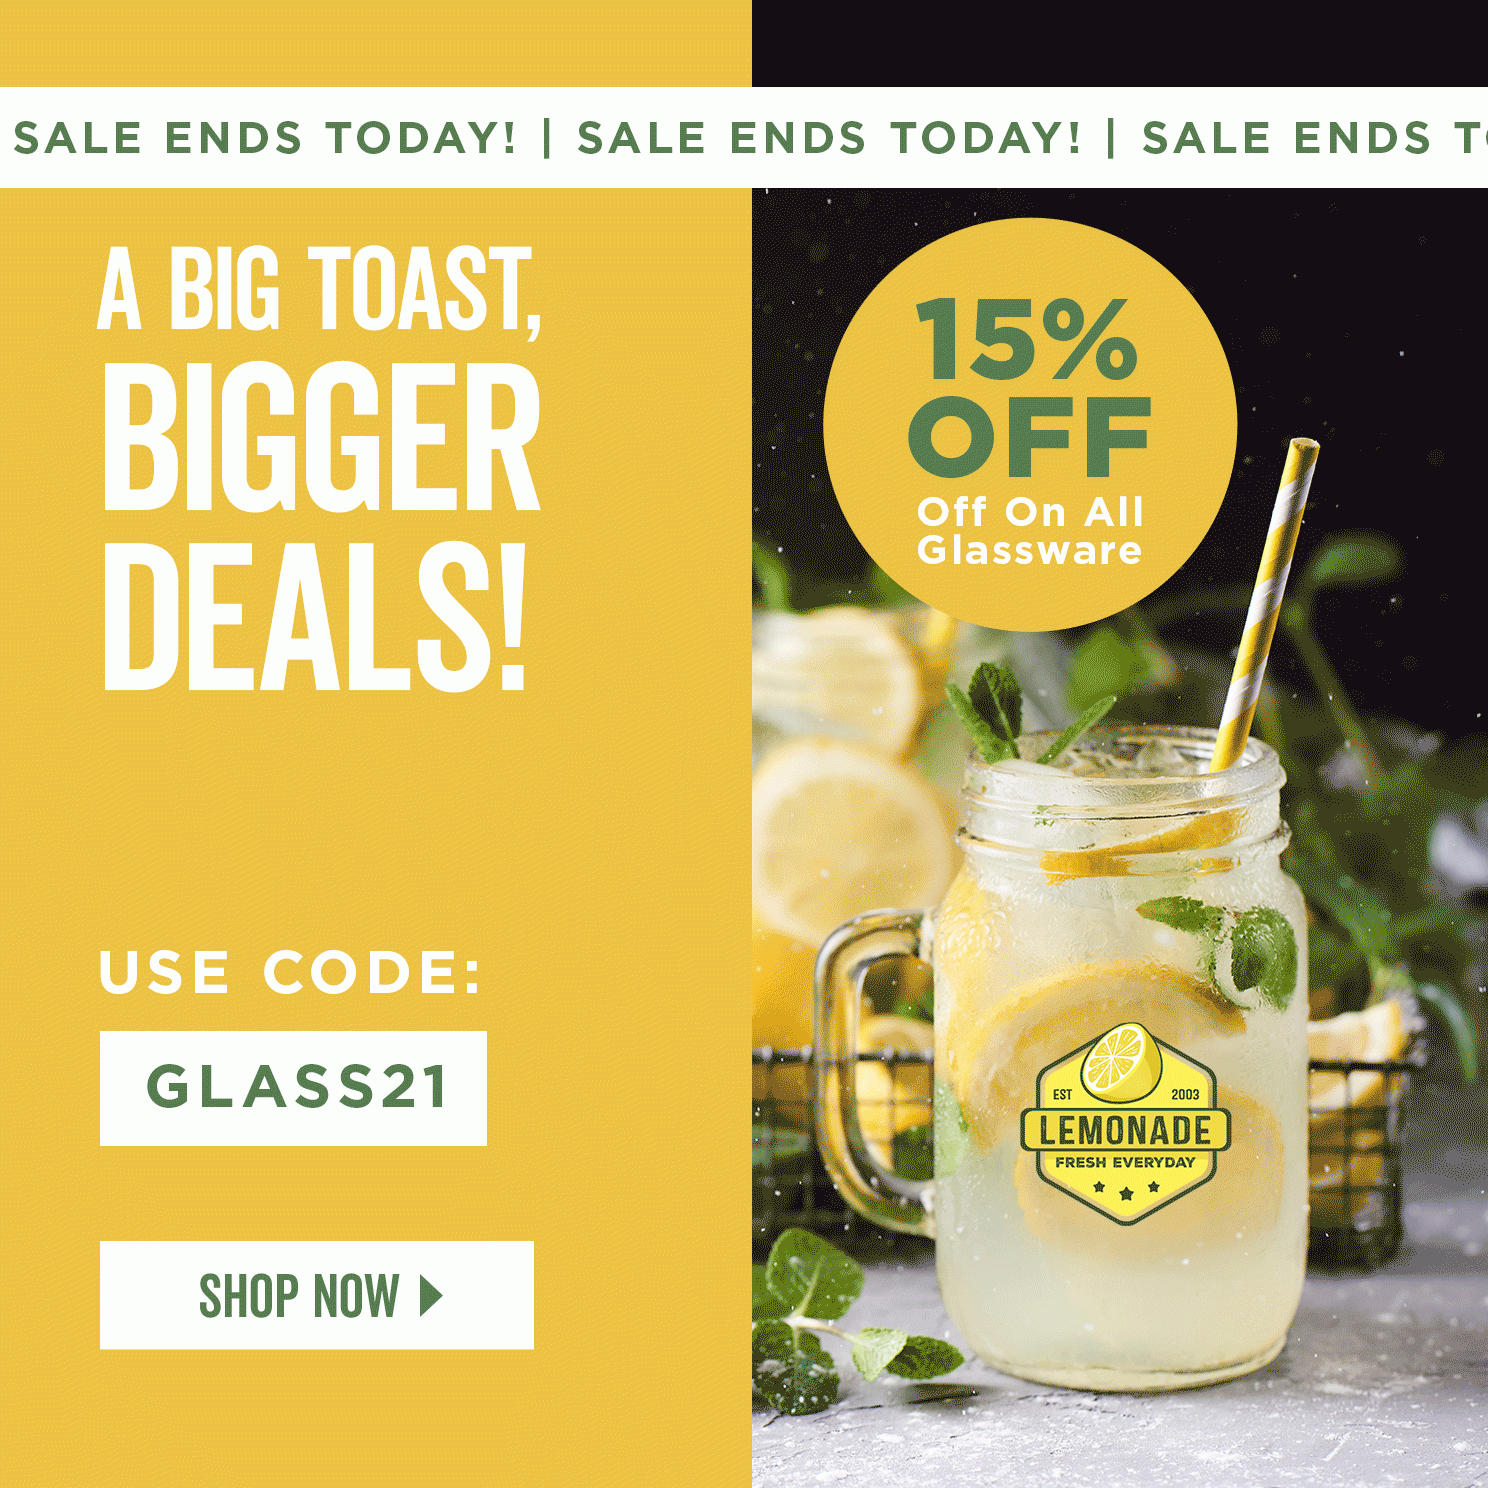 Sale Ends Today | A Big Toast, Bigger Deals! | 15% Off Glassware | Use Code: GLASS21 | Shop Now